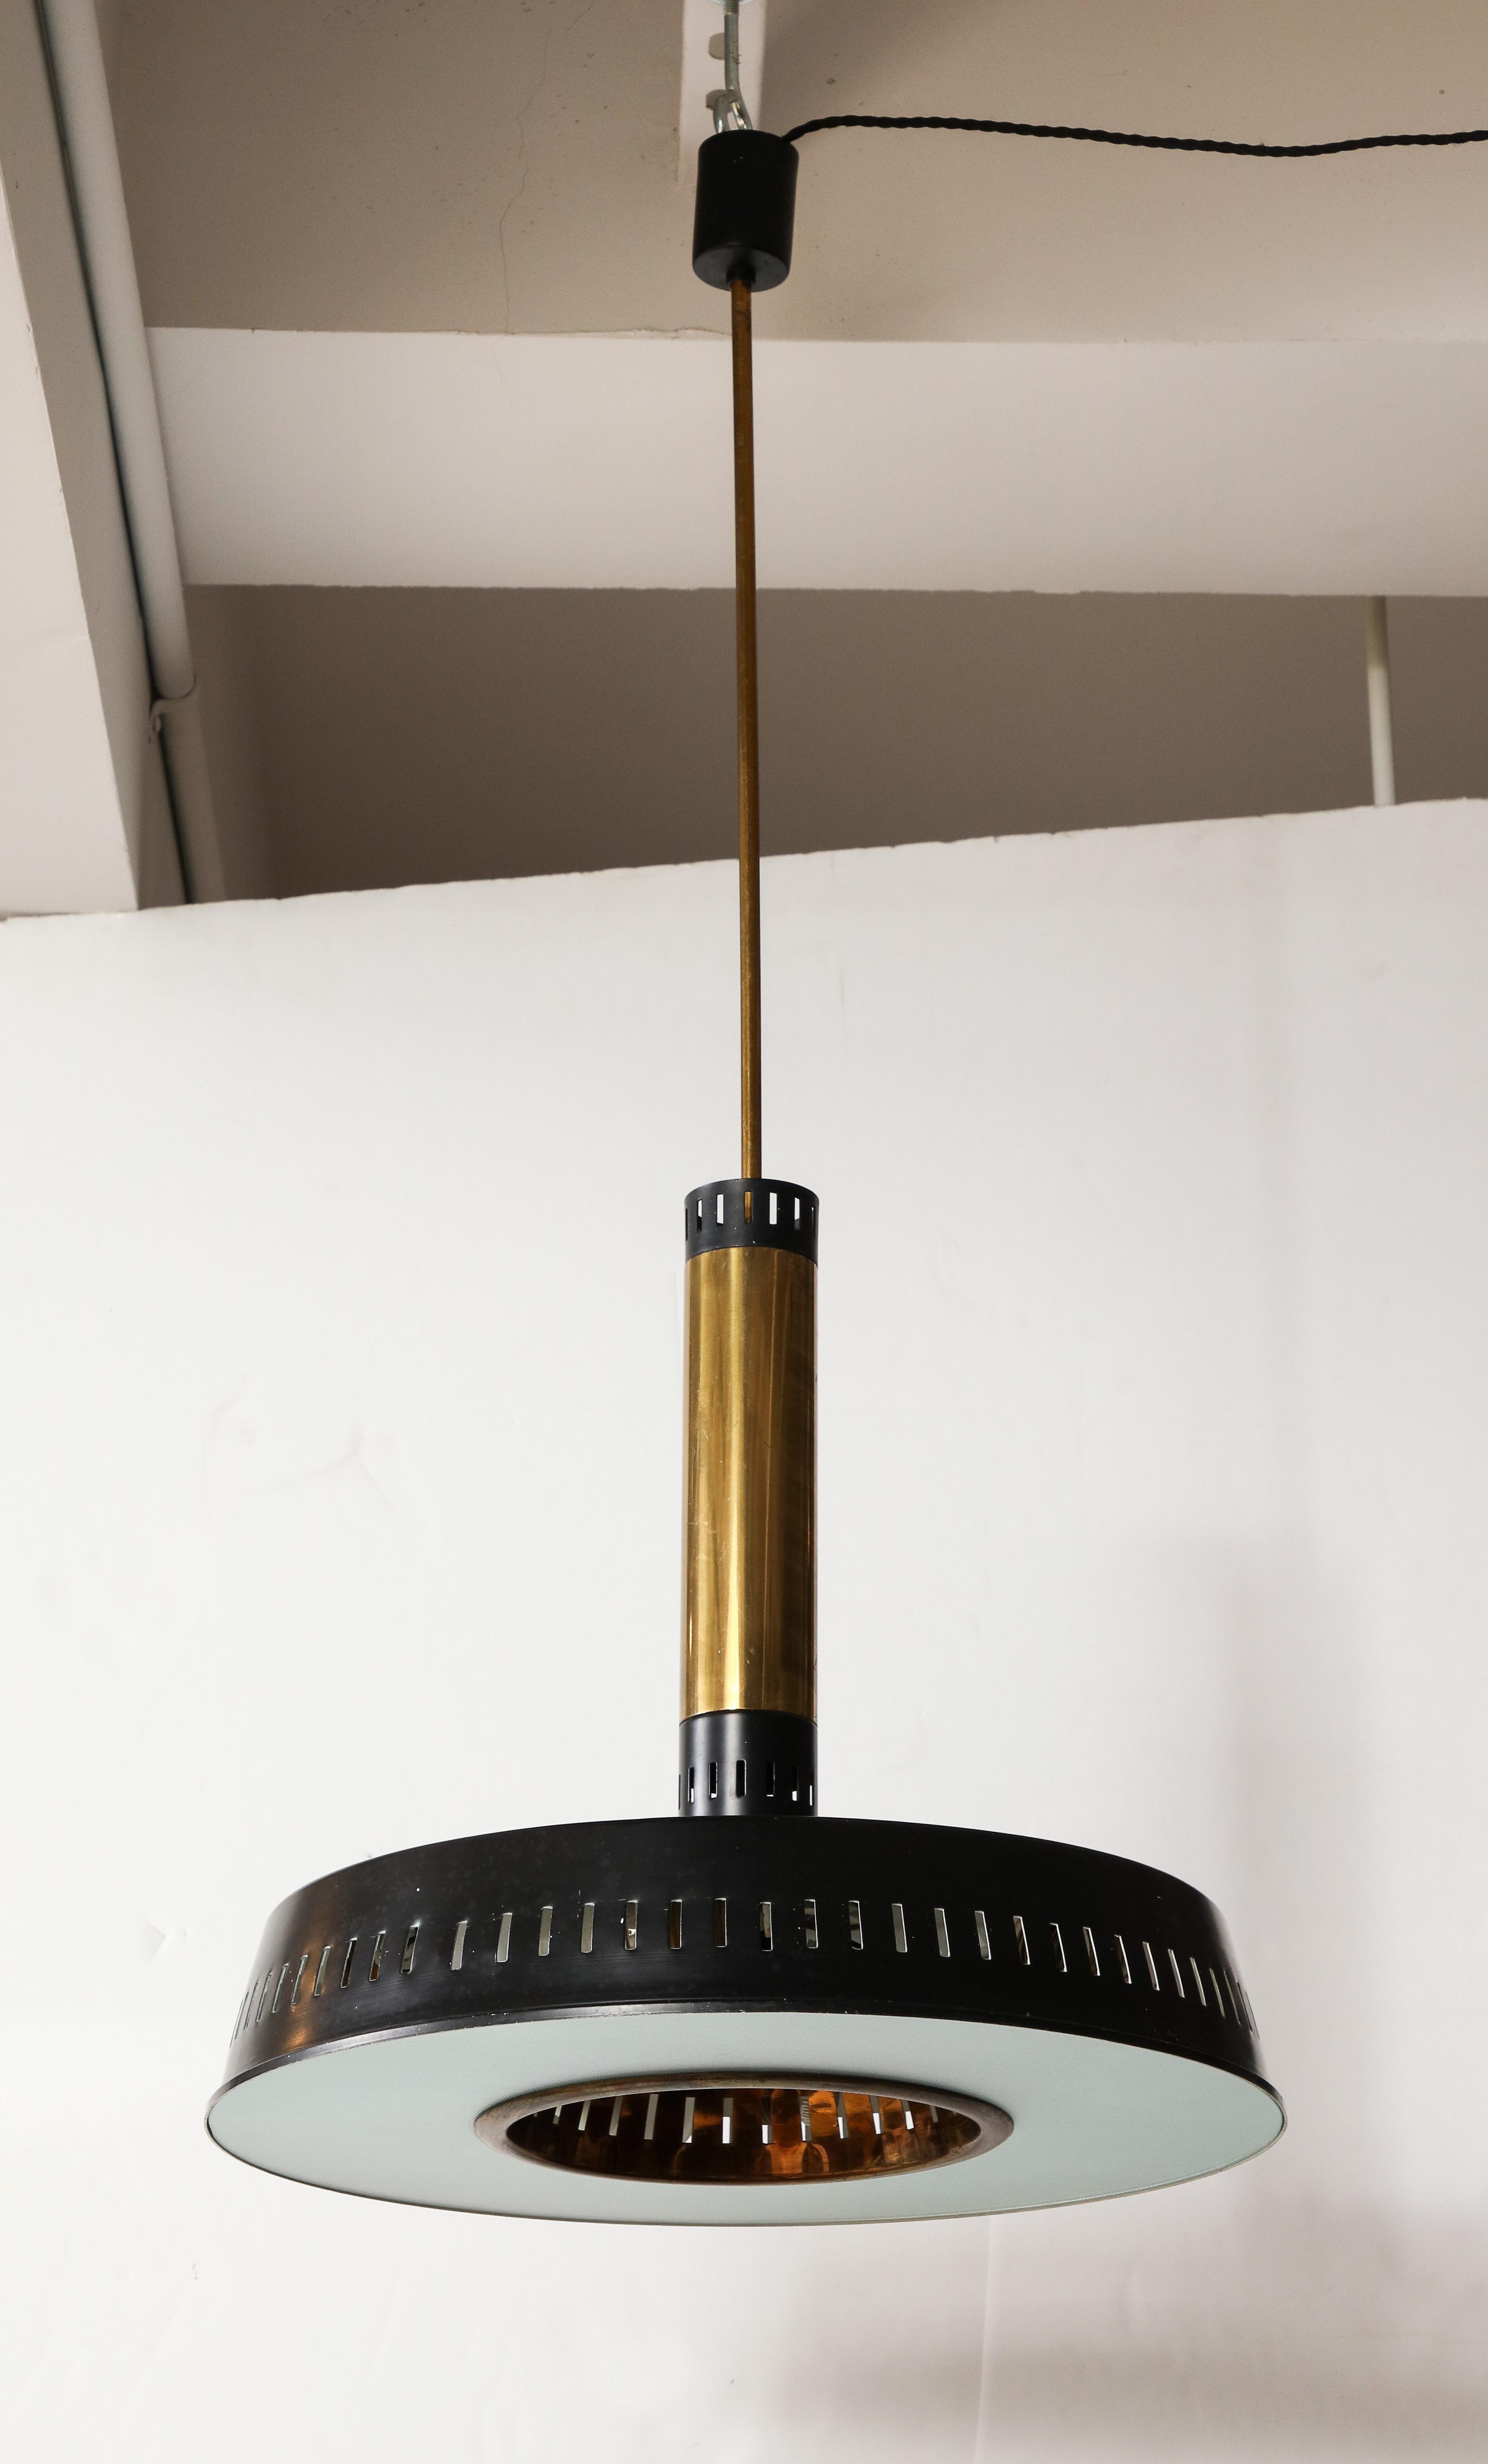 Stilnovo Black & Brass Suspension Chandelier, Textured Glass, Italy, c. 1960’s In Good Condition For Sale In Brooklyn, NY